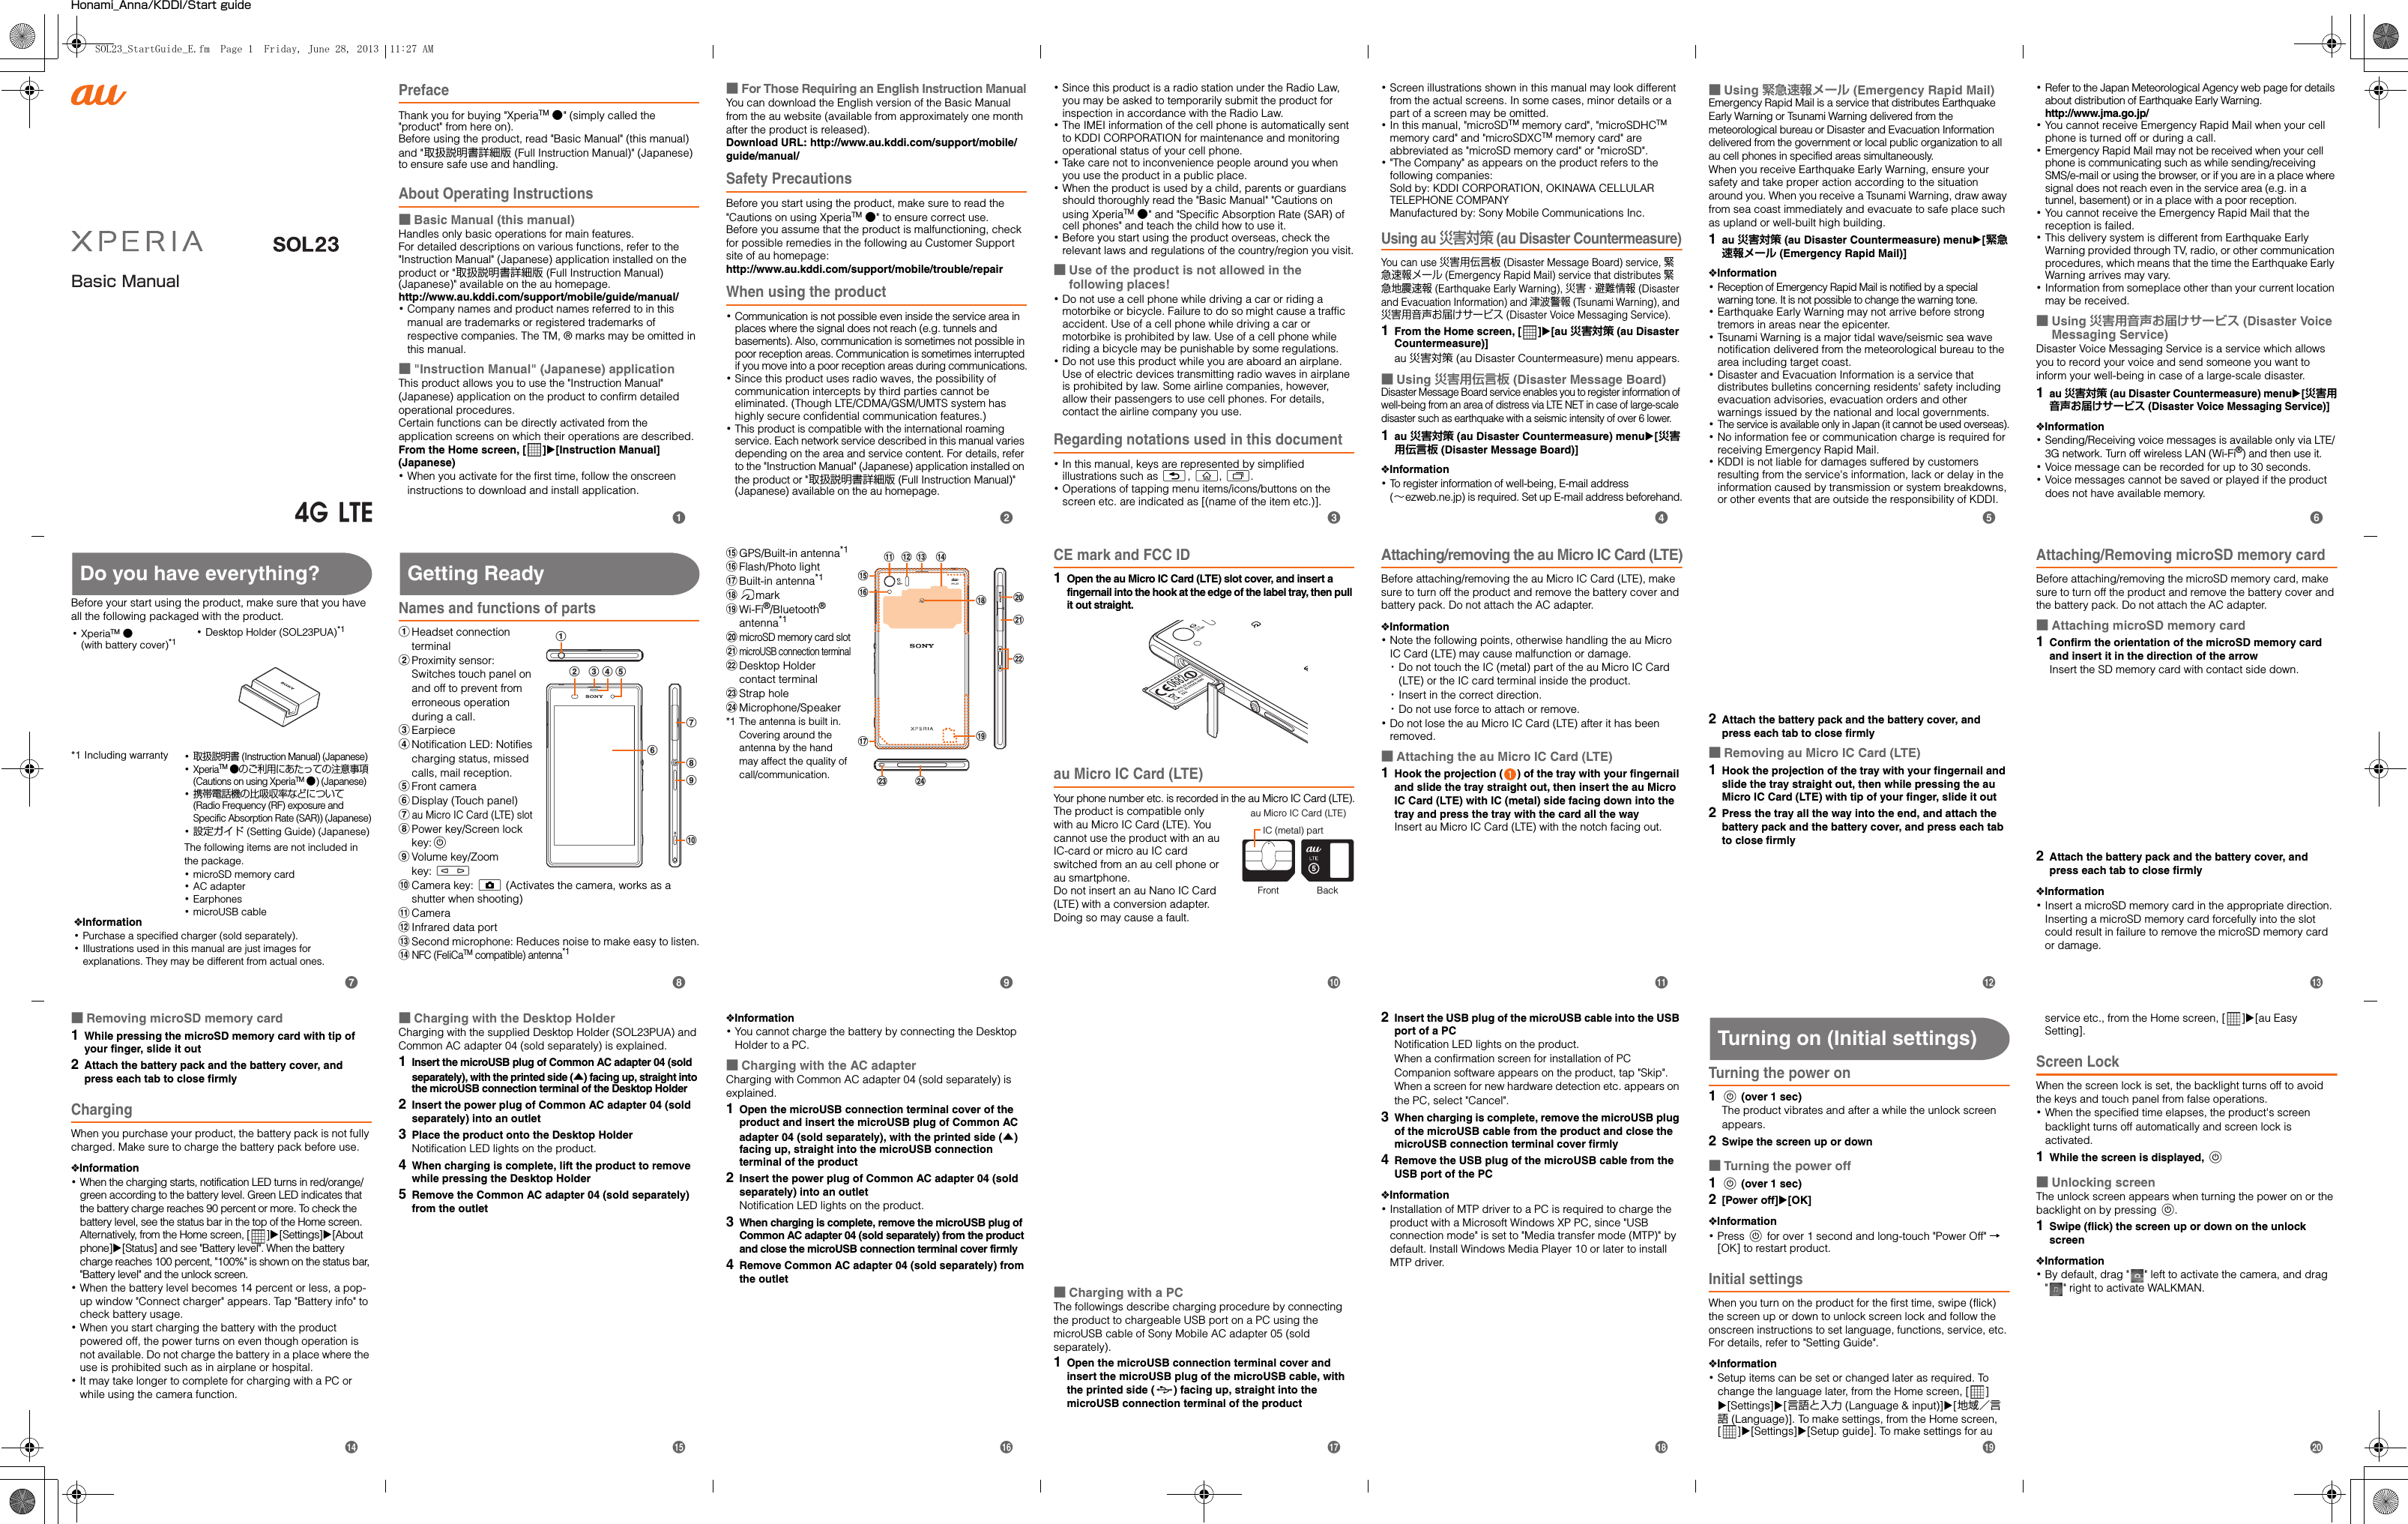 Basic ManualHonami_Anna/KDDI/Start guidePrefaceThank you for buying &quot;XperiaTM ●&quot; (simply called the &quot;product&quot; from here on). Before using the product, read &quot;Basic Manual&quot; (this manual) and &quot;取扱説明書詳細版 (Full Instruction Manual)&quot; (Japanese) to ensure safe use and handling.About Operating Instructions■Basic Manual (this manual)Handles only basic operations for main features.For detailed descriptions on various functions, refer to the &quot;Instruction Manual&quot; (Japanese) application installed on the product or &quot;取扱説明書詳細版 (Full Instruction Manual) (Japanese)&quot; available on the au homepage.http://www.au.kddi.com/support/mobile/guide/manual/･Company names and product names referred to in this manual are trademarks or registered trademarks of respective companies. The TM, ® marks may be omitted in this manual.■&quot;Instruction Manual&quot; (Japanese) applicationThis product allows you to use the &quot;Instruction Manual&quot; (Japanese) application on the product to confirm detailed operational procedures.Certain functions can be directly activated from the application screens on which their operations are described.From the Home screen, [ ]X[Instruction Manual] (Japanese)･When you activate for the first time, follow the onscreen instructions to download and install application.■For Those Requiring an English Instruction ManualYou can download the English version of the Basic Manual from the au website (available from approximately one month after the product is released). Download URL: http://www.au.kddi.com/support/mobile/guide/manual/Safety PrecautionsBefore you start using the product, make sure to read the &quot;Cautions on using XperiaTM ●&quot; to ensure correct use.Before you assume that the product is malfunctioning, check for possible remedies in the following au Customer Support site of au homepage:http://www.au.kddi.com/support/mobile/trouble/repairWhen using the product･Communication is not possible even inside the service area in places where the signal does not reach (e.g. tunnels and basements). Also, communication is sometimes not possible in poor reception areas. Communication is sometimes interrupted if you move into a poor reception areas during communications.･Since this product uses radio waves, the possibility of communication intercepts by third parties cannot be eliminated. (Though LTE/CDMA/GSM/UMTS system has highly secure confidential communication features.)･This product is compatible with the international roaming service. Each network service described in this manual varies depending on the area and service content. For details, refer to the &quot;Instruction Manual&quot; (Japanese) application installed on the product or &quot;取扱説明書詳細版 (Full Instruction Manual)&quot; (Japanese) available on the au homepage.･Since this product is a radio station under the Radio Law, you may be asked to temporarily submit the product for inspection in accordance with the Radio Law.･The IMEI information of the cell phone is automatically sent to KDDI CORPORATION for maintenance and monitoring operational status of your cell phone.･Take care not to inconvenience people around you when you use the product in a public place.･When the product is used by a child, parents or guardians should thoroughly read the &quot;Basic Manual&quot; &quot;Cautions on using XperiaTM ●&quot; and &quot;Specific Absorption Rate (SAR) of cell phones&quot; and teach the child how to use it.･Before you start using the product overseas, check the relevant laws and regulations of the country/region you visit.■Use of the product is not allowed in the following places!･Do not use a cell phone while driving a car or riding a motorbike or bicycle. Failure to do so might cause a traffic accident. Use of a cell phone while driving a car or motorbike is prohibited by law. Use of a cell phone while riding a bicycle may be punishable by some regulations.･Do not use this product while you are aboard an airplane. Use of electric devices transmitting radio waves in airplane is prohibited by law. Some airline companies, however, allow their passengers to use cell phones. For details, contact the airline company you use.Regarding notations used in this document･In this manual, keys are represented by simplified illustrations such as x, y, r.･Operations of tapping menu items/icons/buttons on the screen etc. are indicated as [(name of the item etc.)].･Screen illustrations shown in this manual may look different from the actual screens. In some cases, minor details or a part of a screen may be omitted.･In this manual, &quot;microSDTM memory card&quot;, &quot;microSDHCTM memory card&quot; and &quot;microSDXCTM memory card&quot; are abbreviated as &quot;microSD memory card&quot; or &quot;microSD&quot;.･&quot;The Company&quot; as appears on the product refers to the following companies: Sold by: KDDI CORPORATION, OKINAWA CELLULAR TELEPHONE COMPANYManufactured by: Sony Mobile Communications Inc.Using au 災害対策 (au Disaster Countermeasure)You can use 災害用伝言板 (Disaster Message Board) service, 緊急速報メール (Emergency Rapid Mail) service that distributes 緊急地震速報 (Earthquake Early Warning), 災害・避難情報 (Disaster and Evacuation Information) and 津波警報 (Tsunami Warning), and 災害用音声お届けサービス (Disaster Voice Messaging Service).1From the Home screen, [ ]X[au 災害対策 (au Disaster Countermeasure)]au 災害対策 (au Disaster Countermeasure) menu appears.■Using 災害用伝言板 (Disaster Message Board)Disaster Message Board service enables you to register information of well-being from an area of distress via LTE NET in case of large-scale disaster such as earthquake with a seismic intensity of over 6 lower.1au 災害対策 (au Disaster Countermeasure) menuX[災害用伝言板 (Disaster Message Board)]❖Information･To register information of well-being, E-mail address (∼ezweb.ne.jp) is required. Set up E-mail address beforehand.■Using 緊急速報メール (Emergency Rapid Mail)Emergency Rapid Mail is a service that distributes Earthquake Early Warning or Tsunami Warning delivered from the meteorological bureau or Disaster and Evacuation Information delivered from the government or local public organization to all au cell phones in specified areas simultaneously.When you receive Earthquake Early Warning, ensure your safety and take proper action according to the situation around you. When you receive a Tsunami Warning, draw away from sea coast immediately and evacuate to safe place such as upland or well-built high building.1au 災害対策 (au Disaster Countermeasure) menuX[緊急速報メール (Emergency Rapid Mail)]❖Information･Reception of Emergency Rapid Mail is notified by a special warning tone. It is not possible to change the warning tone.･Earthquake Early Warning may not arrive before strong tremors in areas near the epicenter.･Tsunami Warning is a major tidal wave/seismic sea wave notification delivered from the meteorological bureau to the area including target coast.･Disaster and Evacuation Information is a service that distributes bulletins concerning residents&apos; safety including evacuation advisories, evacuation orders and other warnings issued by the national and local governments.･The service is available only in Japan (it cannot be used overseas).･No information fee or communication charge is required for receiving Emergency Rapid Mail.･KDDI is not liable for damages suffered by customers resulting from the service&apos;s information, lack or delay in the information caused by transmission or system breakdowns, or other events that are outside the responsibility of KDDI.･Refer to the Japan Meteorological Agency web page for details about distribution of Earthquake Early Warning.http://www.jma.go.jp/･You cannot receive Emergency Rapid Mail when your cell phone is turned off or during a call.･Emergency Rapid Mail may not be received when your cell phone is communicating such as while sending/receiving SMS/e-mail or using the browser, or if you are in a place where signal does not reach even in the service area (e.g. in a tunnel, basement) or in a place with a poor reception.･You cannot receive the Emergency Rapid Mail that the reception is failed.･This delivery system is different from Earthquake Early Warning provided through TV, radio, or other communication procedures, which means that the time the Earthquake Early Warning arrives may vary.･Information from someplace other than your current location may be received.■Using 災害用音声お届けサービス (Disaster Voice Messaging Service)Disaster Voice Messaging Service is a service which allows you to record your voice and send someone you want to inform your well-being in case of a large-scale disaster.1au 災害対策 (au Disaster Countermeasure) menuX[災害用音声お届けサービス (Disaster Voice Messaging Service)]❖Information･Sending/Receiving voice messages is available only via LTE/3G network. Turn off wireless LAN (Wi-Fi®) and then use it.･Voice message can be recorded for up to 30 seconds.･Voice messages cannot be saved or played if the product does not have available memory.Do you have everything?Before your start using the product, make sure that you have all the following packaged with the product.Getting ReadyNames and functions of partsaHeadset connection terminalbProximity sensor: Switches touch panel on and off to prevent from erroneous operation during a call.cEarpiecedNotification LED: Notifies charging status, missed calls, mail reception.eFront camerafDisplay (Touch panel)gau Micro IC Card (LTE) slothPower key/Screen lock key:PiVolume key/Zoom key: mjCamera key: k (Activates the camera, works as a shutter when shooting)kCameralInfrared data portmSecond microphone: Reduces noise to make easy to listen.nNFC (FeliCaTM compatible) antenna*1oGPS/Built-in antenna*1pFlash/Photo lightqBuilt-in antenna*1rmarksWi-Fi®/Bluetooth® antenna*1tmicroSD memory card slotumicroUSB connection terminalvDesktop Holder contact terminalwStrap holexMicrophone/Speaker*1 The antenna is built in. Covering around the antenna by the hand may affect the quality of call/communication.CE mark and FCC ID1Open the au Micro IC Card (LTE) slot cover, and insert a fingernail into the hook at the edge of the label tray, then pull it out straight.au Micro IC Card (LTE)Your phone number etc. is recorded in the au Micro IC Card (LTE).The product is compatible only with au Micro IC Card (LTE). You cannot use the product with an au IC-card or micro au IC card switched from an au cell phone or au smartphone.Do not insert an au Nano IC Card (LTE) with a conversion adapter. Doing so may cause a fault.Attaching/removing the au Micro IC Card (LTE)Before attaching/removing the au Micro IC Card (LTE), make sure to turn off the product and remove the battery cover and battery pack. Do not attach the AC adapter.❖Information･Note the following points, otherwise handling the au Micro IC Card (LTE) may cause malfunction or damage.･Do not touch the IC (metal) part of the au Micro IC Card  (LTE) or the IC card terminal inside the product.･Insert in the correct direction.･Do not use force to attach or remove.･Do not lose the au Micro IC Card (LTE) after it has been removed.■Attaching the au Micro IC Card (LTE)1Hook the projection ( ) of the tray with your fingernail and slide the tray straight out, then insert the au Micro IC Card (LTE) with IC (metal) side facing down into the tray and press the tray with the card all the wayInsert au Micro IC Card (LTE) with the notch facing out.2Attach the battery pack and the battery cover, and press each tab to close firmly■Removing au Micro IC Card (LTE)1Hook the projection of the tray with your fingernail and slide the tray straight out, then while pressing the au Micro IC Card (LTE) with tip of your finger, slide it out2Press the tray all the way into the end, and attach the battery pack and the battery cover, and press each tab to close firmlyAttaching/Removing microSD memory cardBefore attaching/removing the microSD memory card, make sure to turn off the product and remove the battery cover and the battery pack. Do not attach the AC adapter.■Attaching microSD memory card1Confirm the orientation of the microSD memory card and insert it in the direction of the arrowInsert the SD memory card with contact side down.2Attach the battery pack and the battery cover, and press each tab to close firmly❖Information･Insert a microSD memory card in the appropriate direction. Inserting a microSD memory card forcefully into the slot could result in failure to remove the microSD memory card or damage.･XperiaTM ●(with battery cover)*1･Desktop Holder (SOL23PUA)*1*1 Including warranty ･取扱説明書 (Instruction Manual) (Japanese)･XperiaTM ●のご利用にあたっての注意事項 (Cautions on using XperiaTM ●) (Japanese)･携帯電話機の比吸収率などについて (Radio Frequency (RF) exposure and Specific Absorption Rate (SAR)) (Japanese)･設定ガイド (Setting Guide) (Japanese)The following items are not included in the package.･microSD memory card･AC adapter･Earphones･microUSB cable❖Information･Purchase a specified charger (sold separately).･Illustrations used in this manual are just images for explanations. They may be different from actual ones.fhgijbac d eklm nutrspoqxwvIC (metal) partFront Backau Micro IC Card (LTE)■Removing microSD memory card1While pressing the microSD memory card with tip of your finger, slide it out2Attach the battery pack and the battery cover, and press each tab to close firmlyChargingWhen you purchase your product, the battery pack is not fully charged. Make sure to charge the battery pack before use.❖Information･When the charging starts, notification LED turns in red/orange/green according to the battery level. Green LED indicates that the battery charge reaches 90 percent or more. To check the battery level, see the status bar in the top of the Home screen. Alternatively, from the Home screen, [ ]X[Settings]X[About phone]X[Status] and see &quot;Battery level&quot;. When the battery charge reaches 100 percent, &quot;100%&quot; is shown on the status bar, &quot;Battery level&quot; and the unlock screen.･When the battery level becomes 14 percent or less, a pop-up window &quot;Connect charger&quot; appears. Tap &quot;Battery info&quot; to check battery usage.･When you start charging the battery with the product powered off, the power turns on even though operation is not available. Do not charge the battery in a place where the use is prohibited such as in airplane or hospital.･It may take longer to complete for charging with a PC or while using the camera function.■Charging with the Desktop HolderCharging with the supplied Desktop Holder (SOL23PUA) and Common AC adapter 04 (sold separately) is explained.1Insert the microUSB plug of Common AC adapter 04 (sold separately), with the printed side (▲) facing up, straight into the microUSB connection terminal of the Desktop Holder2Insert the power plug of Common AC adapter 04 (sold separately) into an outlet3Place the product onto the Desktop HolderNotification LED lights on the product.4When charging is complete, lift the product to remove while pressing the Desktop Holder5Remove the Common AC adapter 04 (sold separately) from the outlet❖Information･You cannot charge the battery by connecting the Desktop Holder to a PC.■Charging with the AC adapterCharging with Common AC adapter 04 (sold separately) is explained.1Open the microUSB connection terminal cover of the product and insert the microUSB plug of Common AC adapter 04 (sold separately), with the printed side (▲) facing up, straight into the microUSB connection terminal of the product2Insert the power plug of Common AC adapter 04 (sold separately) into an outletNotification LED lights on the product.3When charging is complete, remove the microUSB plug of Common AC adapter 04 (sold separately) from the product and close the microUSB connection terminal cover firmly4Remove Common AC adapter 04 (sold separately) from the outlet■Charging with a PCThe followings describe charging procedure by connecting the product to chargeable USB port on a PC using the microUSB cable of Sony Mobile AC adapter 05 (sold separately).1Open the microUSB connection terminal cover and insert the microUSB plug of the microUSB cable, with the printed side ( ) facing up, straight into the microUSB connection terminal of the product2Insert the USB plug of the microUSB cable into the USB port of a PCNotification LED lights on the product.When a confirmation screen for installation of PC Companion software appears on the product, tap &quot;Skip&quot;.When a screen for new hardware detection etc. appears on the PC, select &quot;Cancel&quot;.3When charging is complete, remove the microUSB plug of the microUSB cable from the product and close the microUSB connection terminal cover firmly4Remove the USB plug of the microUSB cable from the USB port of the PC❖Information･Installation of MTP driver to a PC is required to charge the product with a Microsoft Windows XP PC, since &quot;USB connection mode&quot; is set to &quot;Media transfer mode (MTP)&quot; by default. Install Windows Media Player 10 or later to install MTP driver.Turning on (Initial settings)Turning the power on1P (over 1 sec)The product vibrates and after a while the unlock screen appears.2Swipe the screen up or down■Turning the power off1P (over 1 sec)2[Power off]X[OK]❖Information･Press P for over 1 second and long-touch &quot;Power Off&quot; → [OK] to restart product.Initial settingsWhen you turn on the product for the first time, swipe (flick) the screen up or down to unlock screen lock and follow the onscreen instructions to set language, functions, service, etc. For details, refer to &quot;Setting Guide&quot;.❖Information･Setup items can be set or changed later as required. To change the language later, from the Home screen, [ ] X[Settings]X[言語と入力 (Language &amp; input)]X[地域／言語 (Language)]. To make settings, from the Home screen, []X[Settings]X[Setup guide]. To make settings for au service etc., from the Home screen, [ ]X[au Easy Setting].Screen LockWhen the screen lock is set, the backlight turns off to avoid the keys and touch panel from false operations.･When the specified time elapses, the product&apos;s screen backlight turns off automatically and screen lock is activated.1While the screen is displayed, P■Unlocking screenThe unlock screen appears when turning the power on or the backlight on by pressing P.1Swipe (flick) the screen up or down on the unlock screen❖Information･By default, drag &quot; &quot; left to activate the camera, and drag &quot; &quot; right to activate WALKMAN.bcdefijklmghpqrstnoaSOL23_StartGuide_E.fm  Page 1  Friday, June 28, 2013  11:27 AM